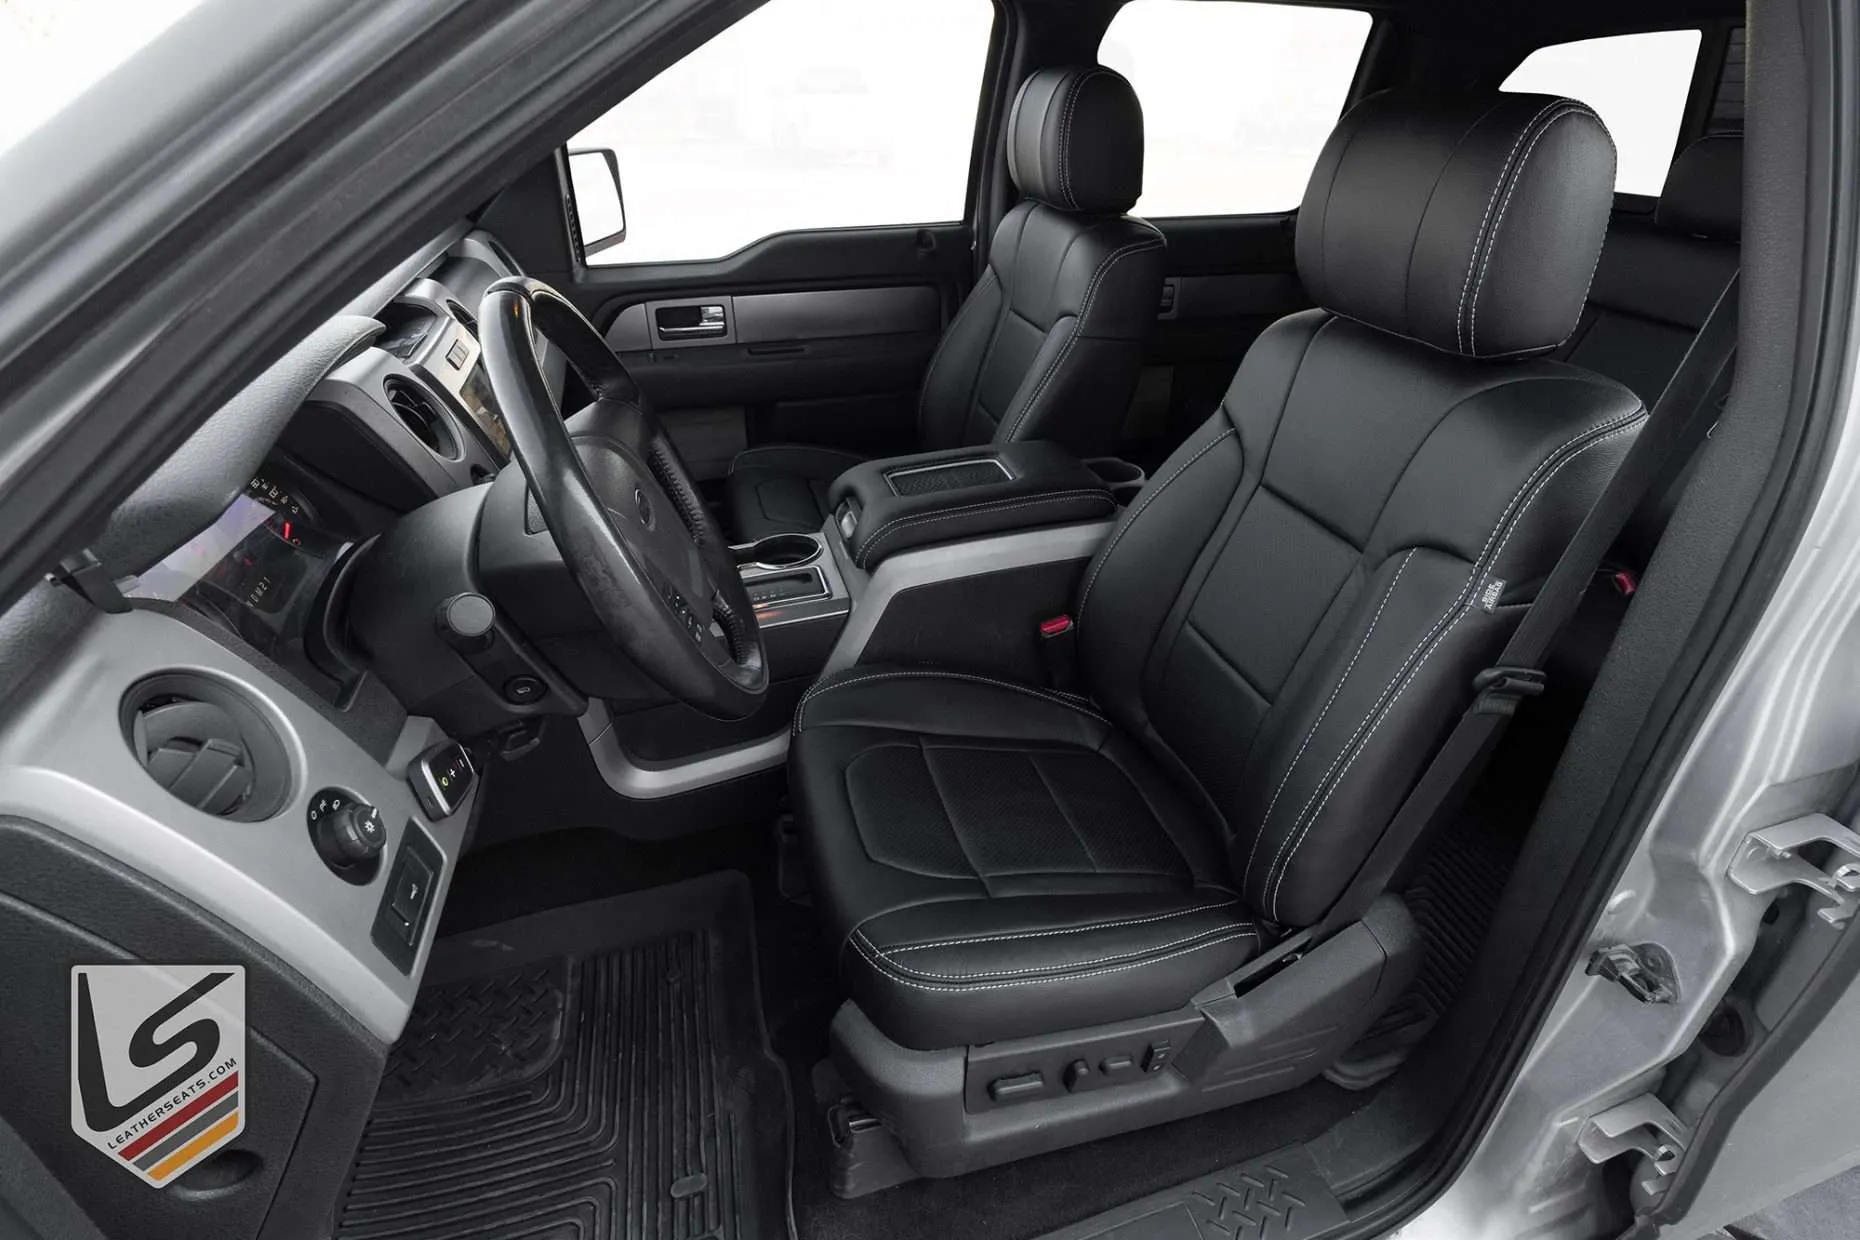 2012 Ford Raptor with Black Perforated leather seats and Silver stitching - LS Gallery